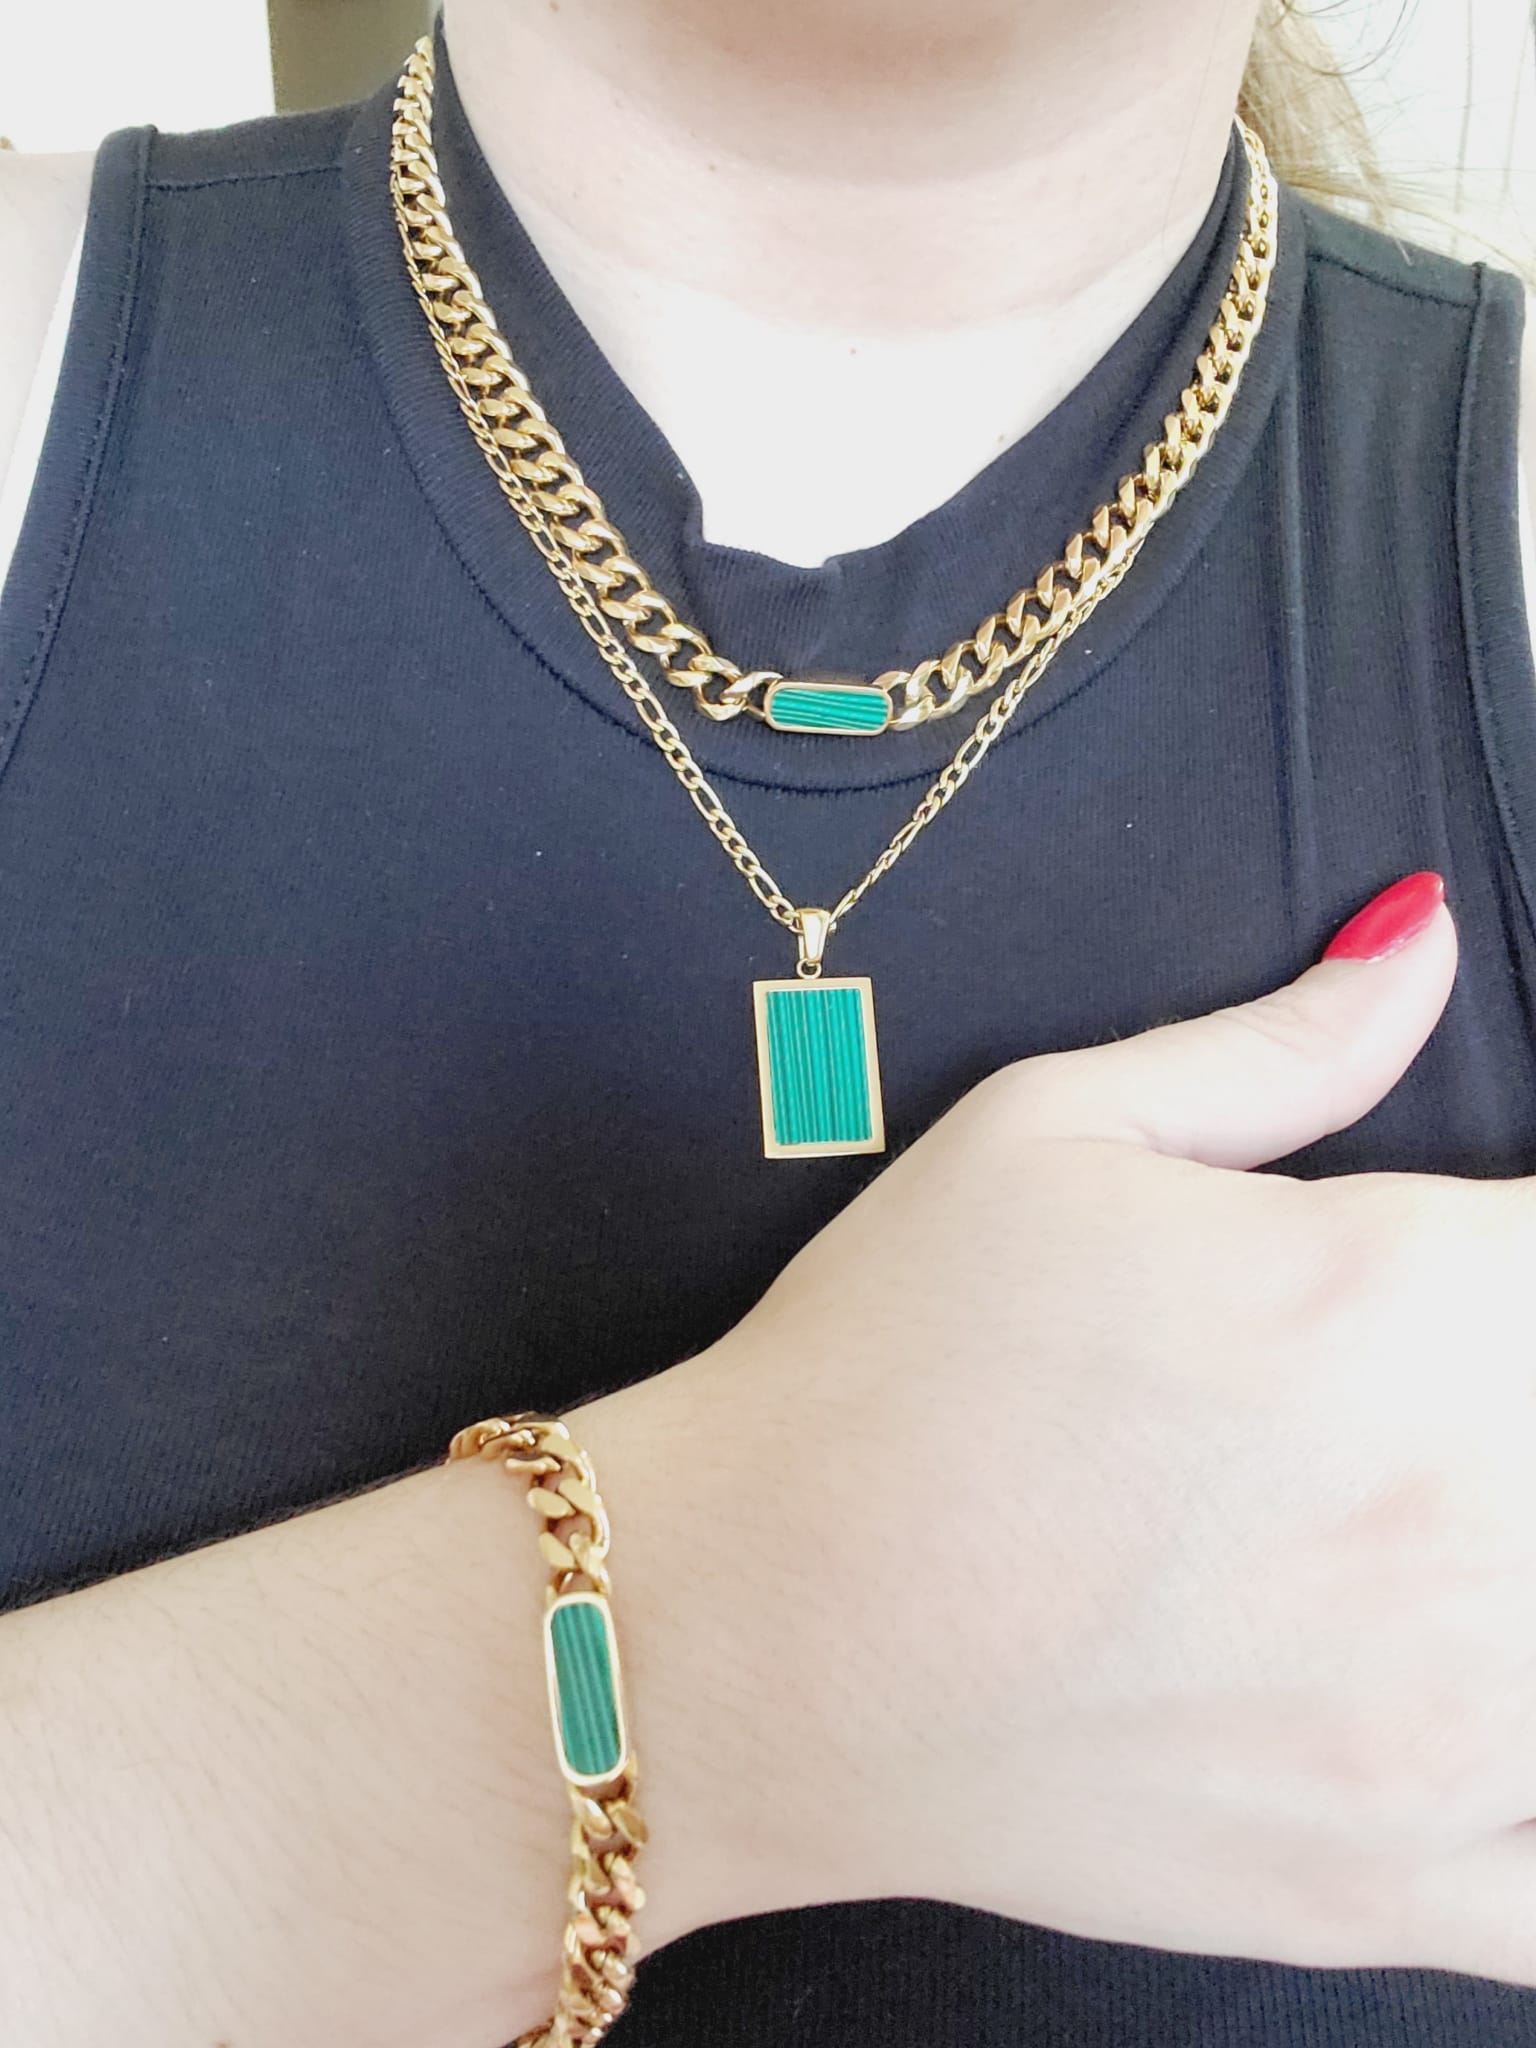 green Cuban Set, Green Gold plated Necklace, Green Gold plated Set, Mariner Link Chain, Heavy Chain Necklace, Thick Gold Chain, Chunky Gold Choker, Puffy Mariner Chain, Gold Mariner Chain, Gold Anchor Link, Puff Link Chain, Mariner Necklace, Puffy Link Necklace, Gold Puff Chain, Thick Puff Necklace, Gift for Wife, Christmas Gift for her